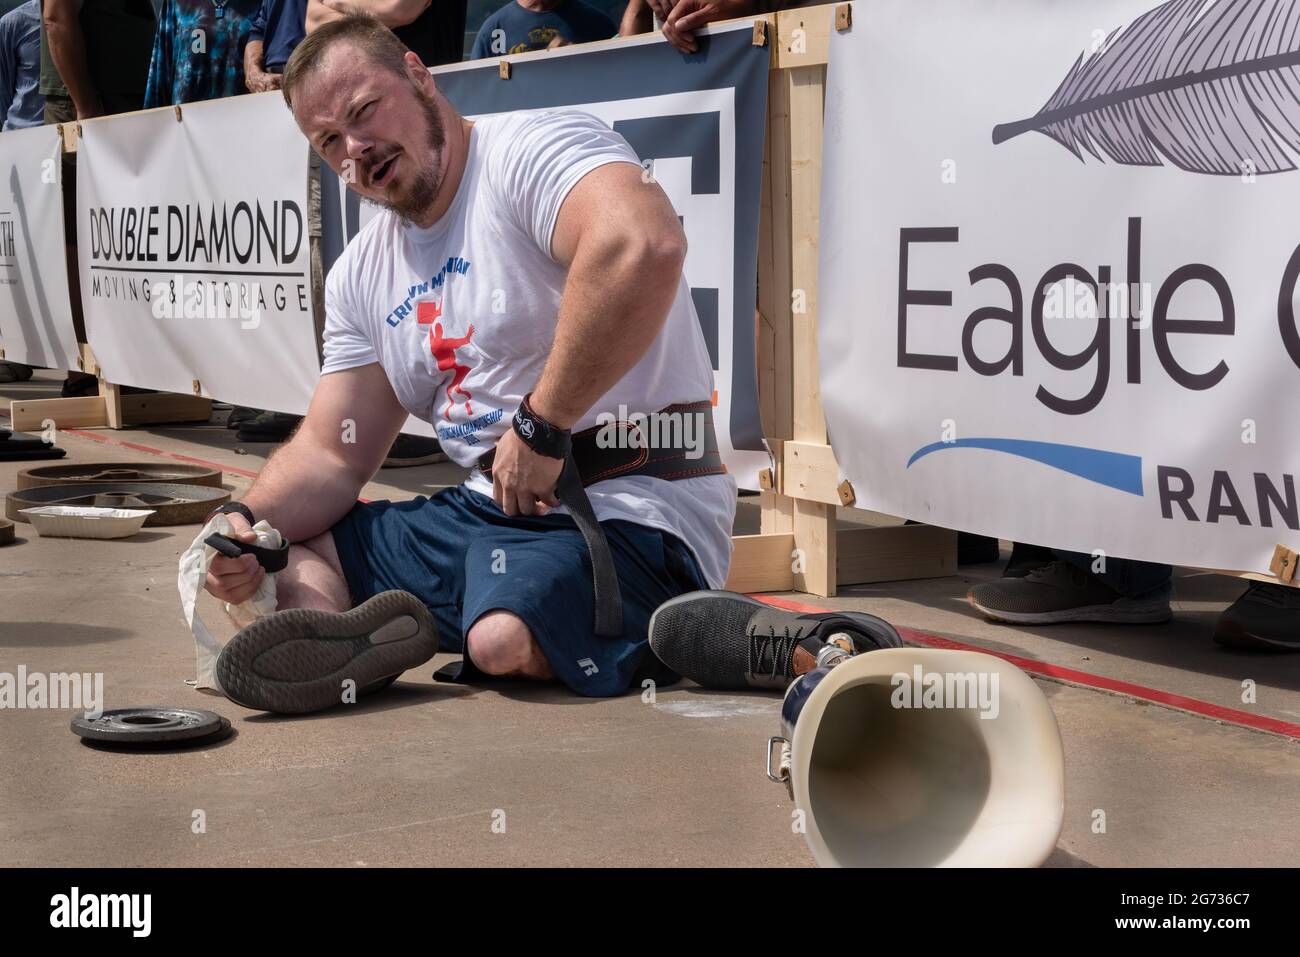 Weightlifter Joshua Smith looks at camera, sitting on sidelines of Crown Mountain Strongman Championship, his prosthetic leg on ground next to him. Stock Photo